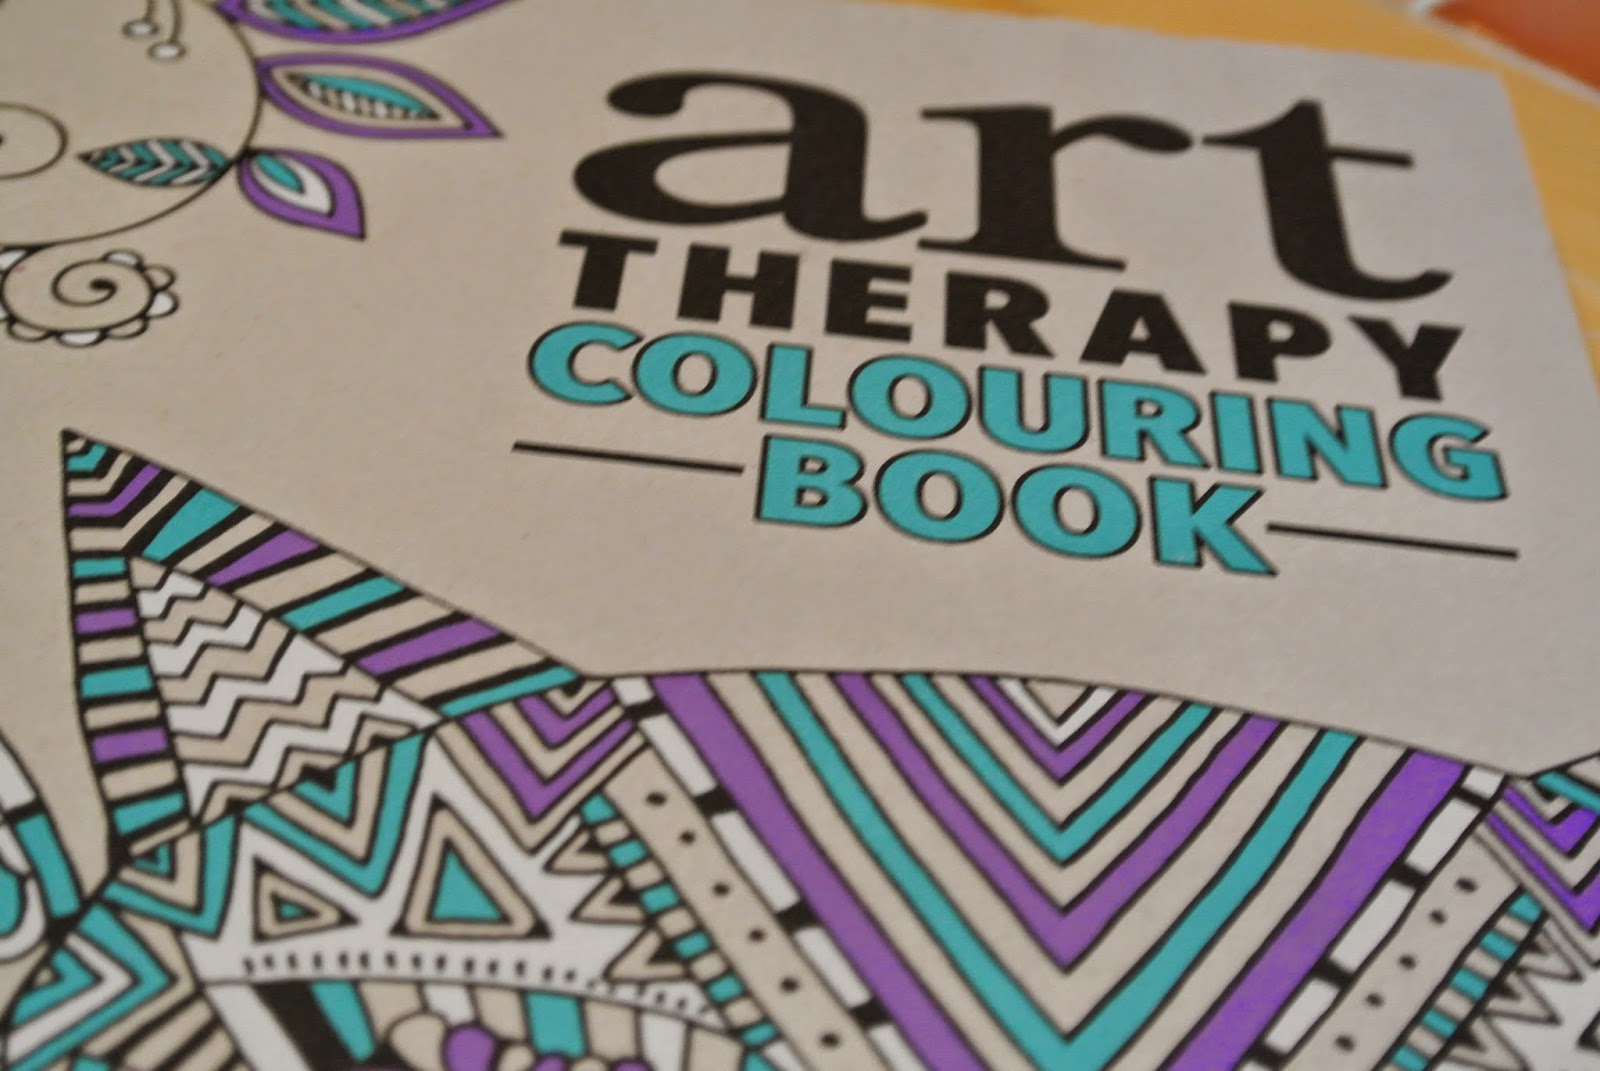 Glitter Glory Art Therapy Colouring Book Review